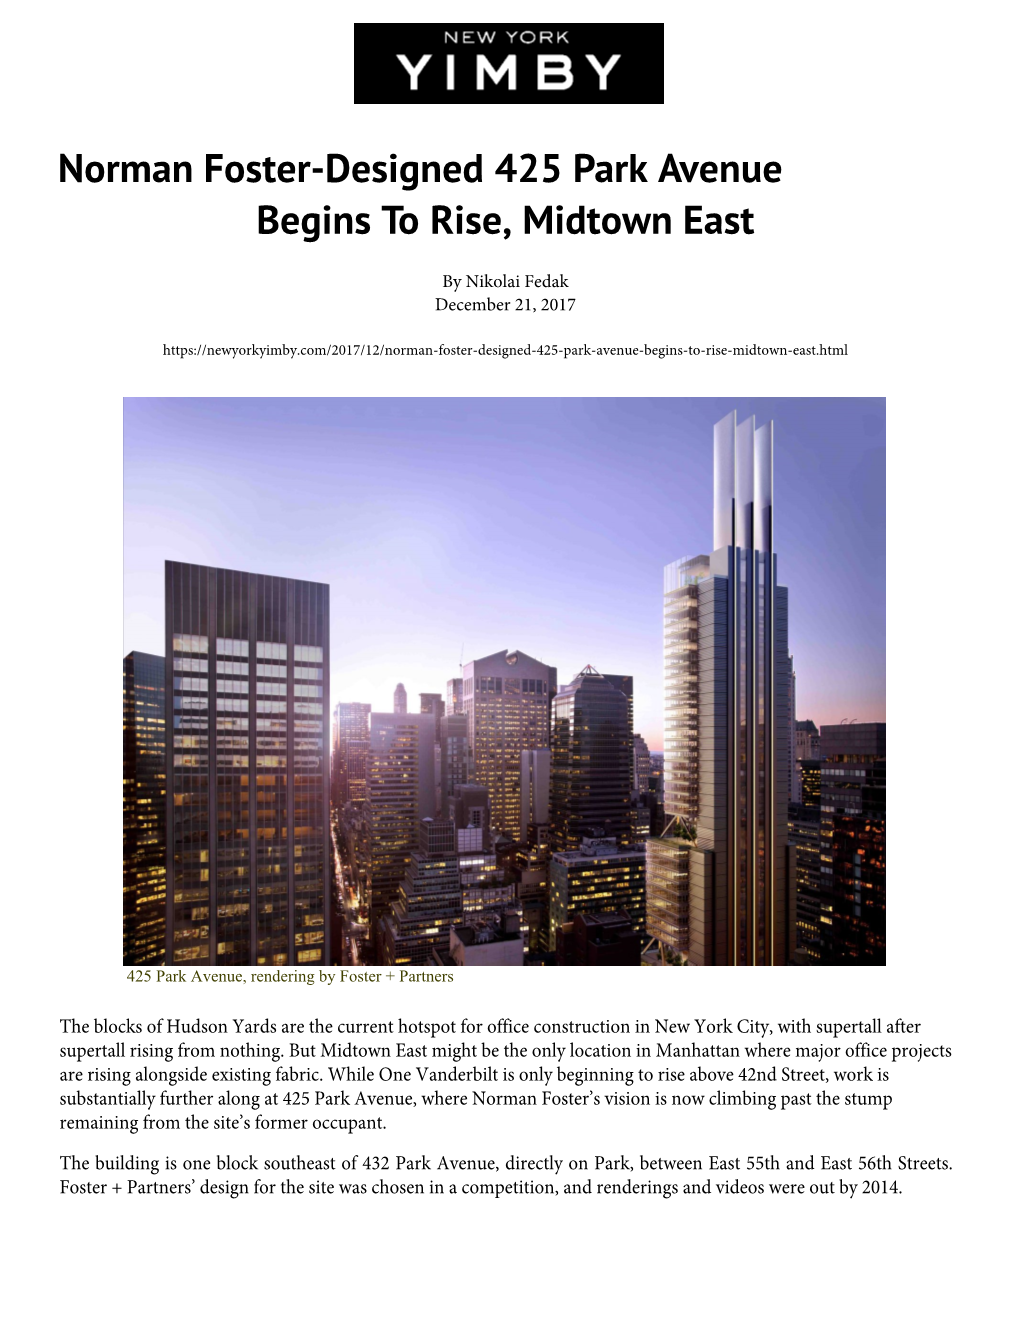 Norman Foster-Designed 425 Park Avenue Begins to Rise, Midtown East